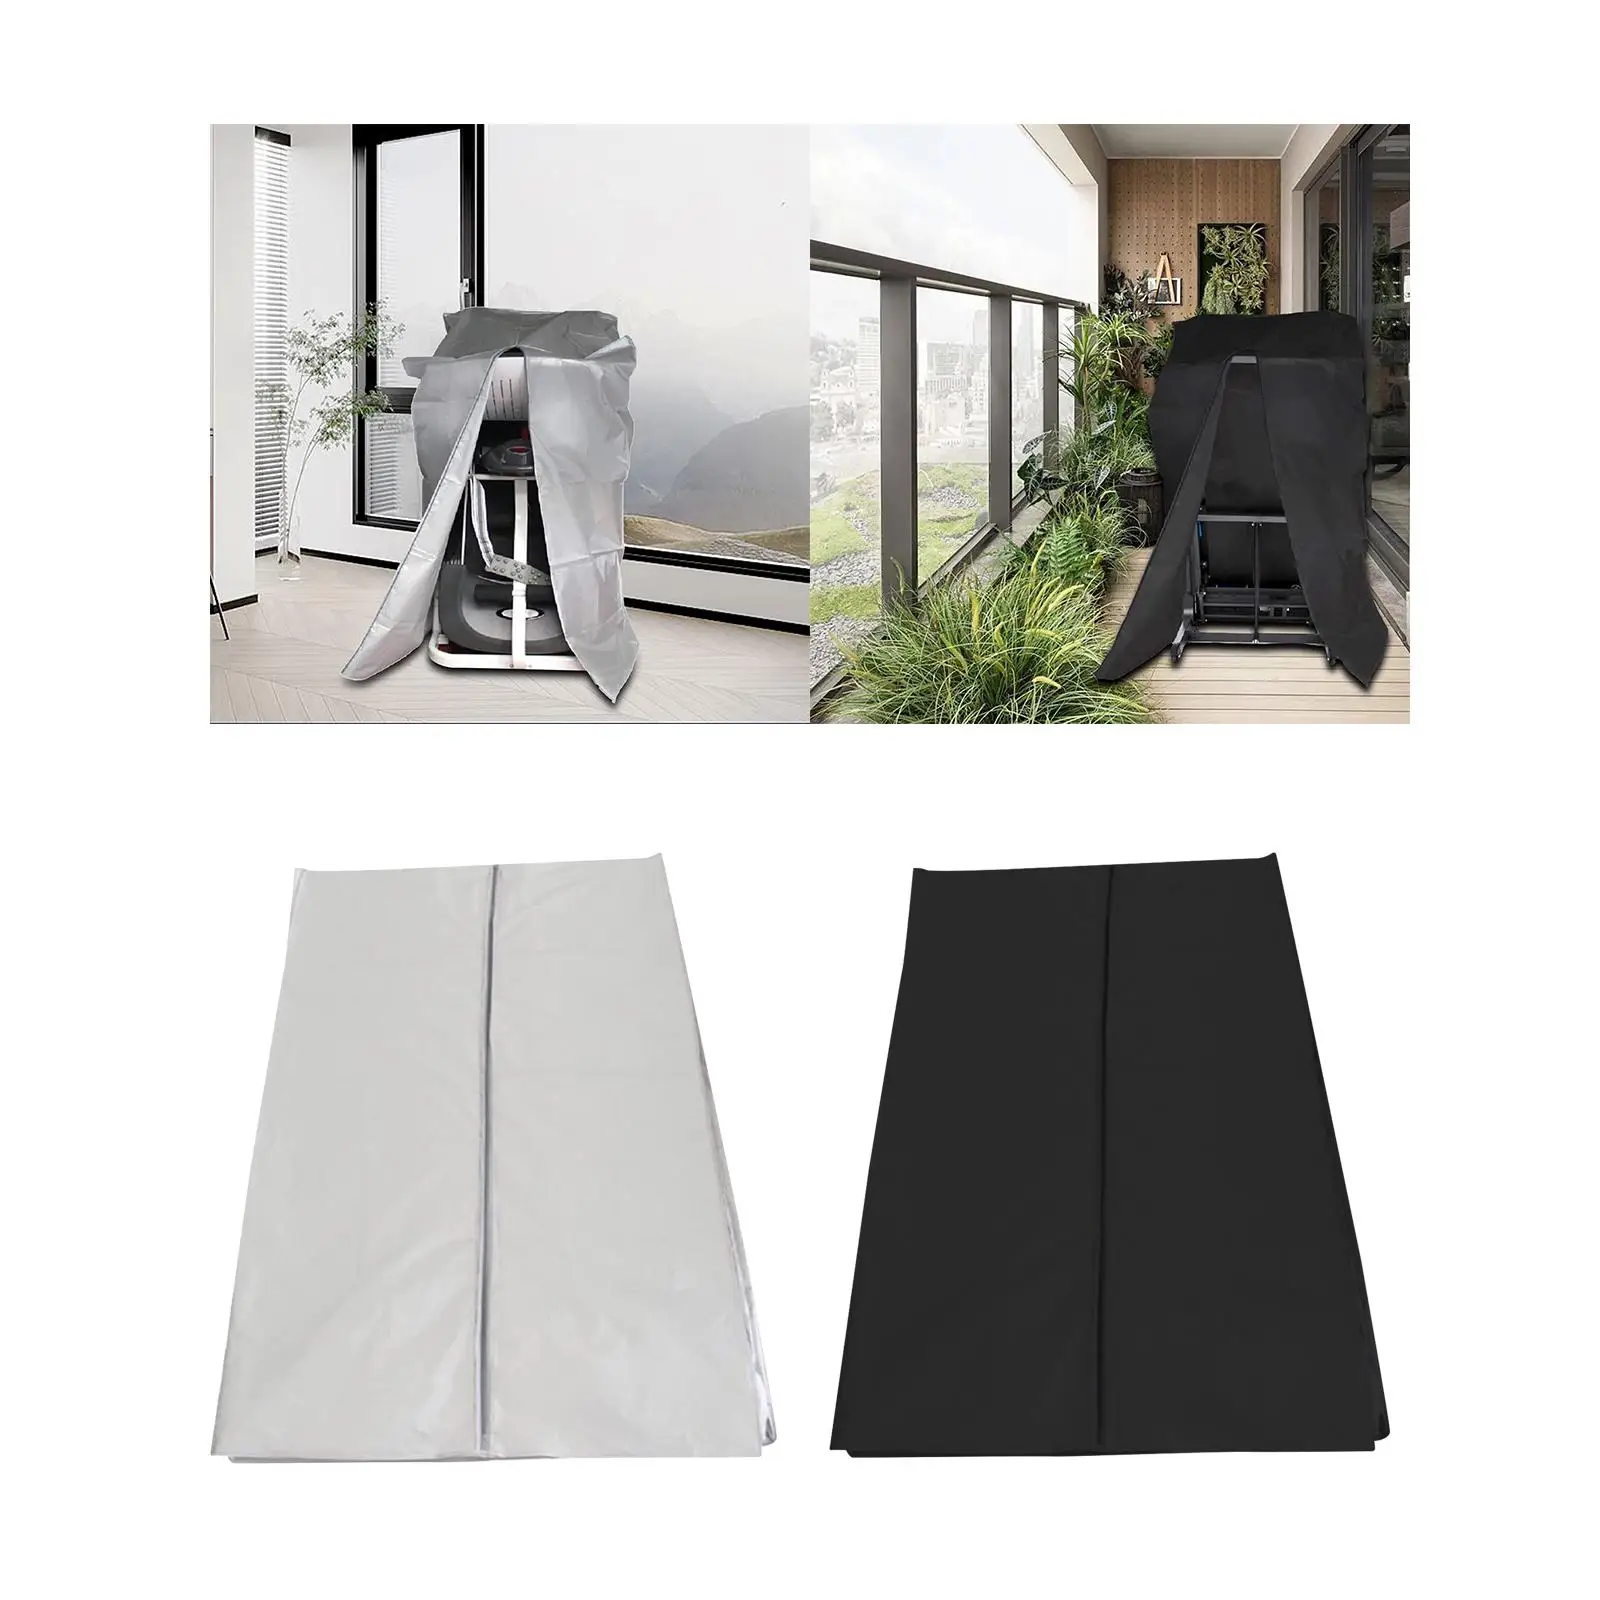 Treadmill Cover Waterproof Oxford Cloth Windproof for Indoor Home Outdoor